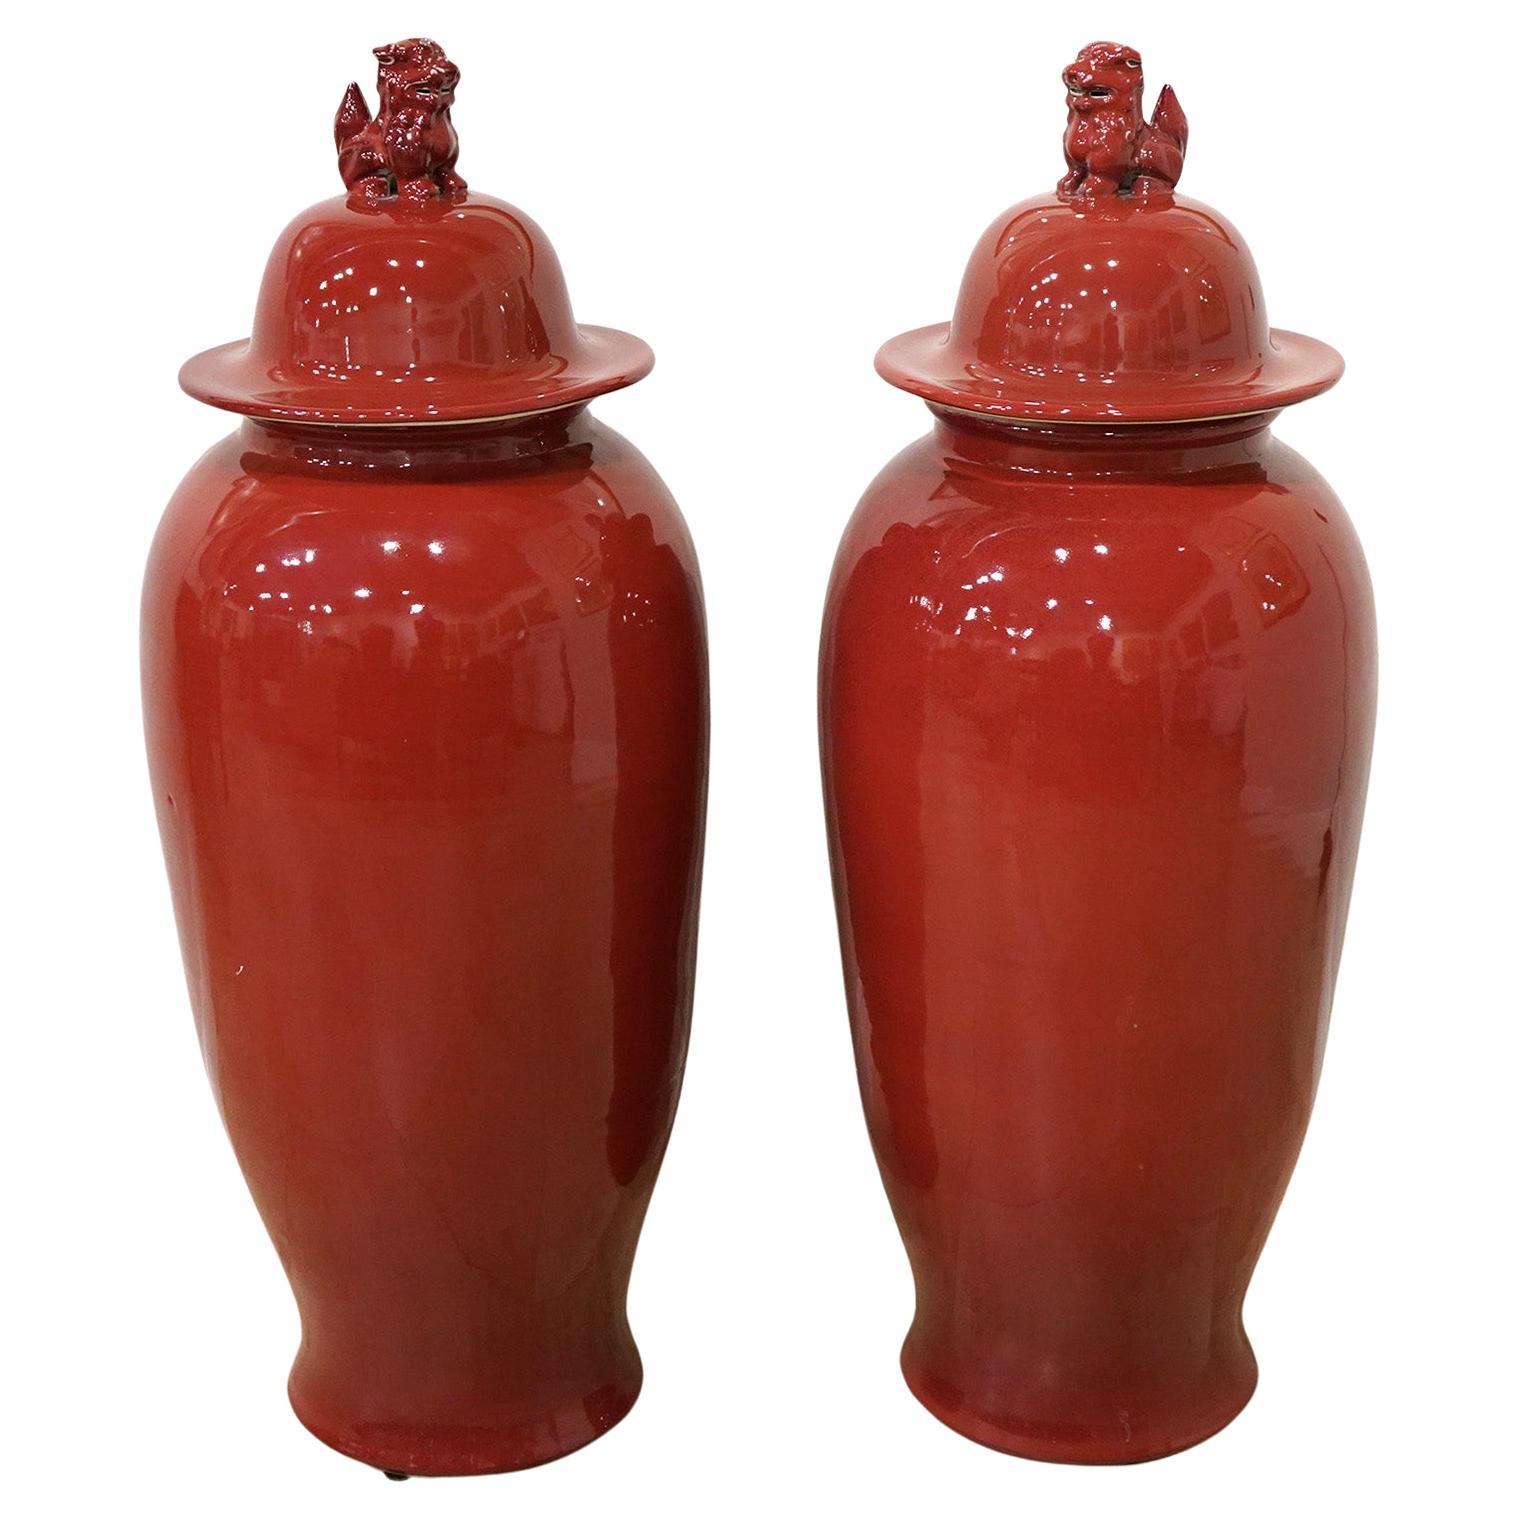 Pair of LARGE Chinese Palace Size Oxblood Colored Urns 47" H